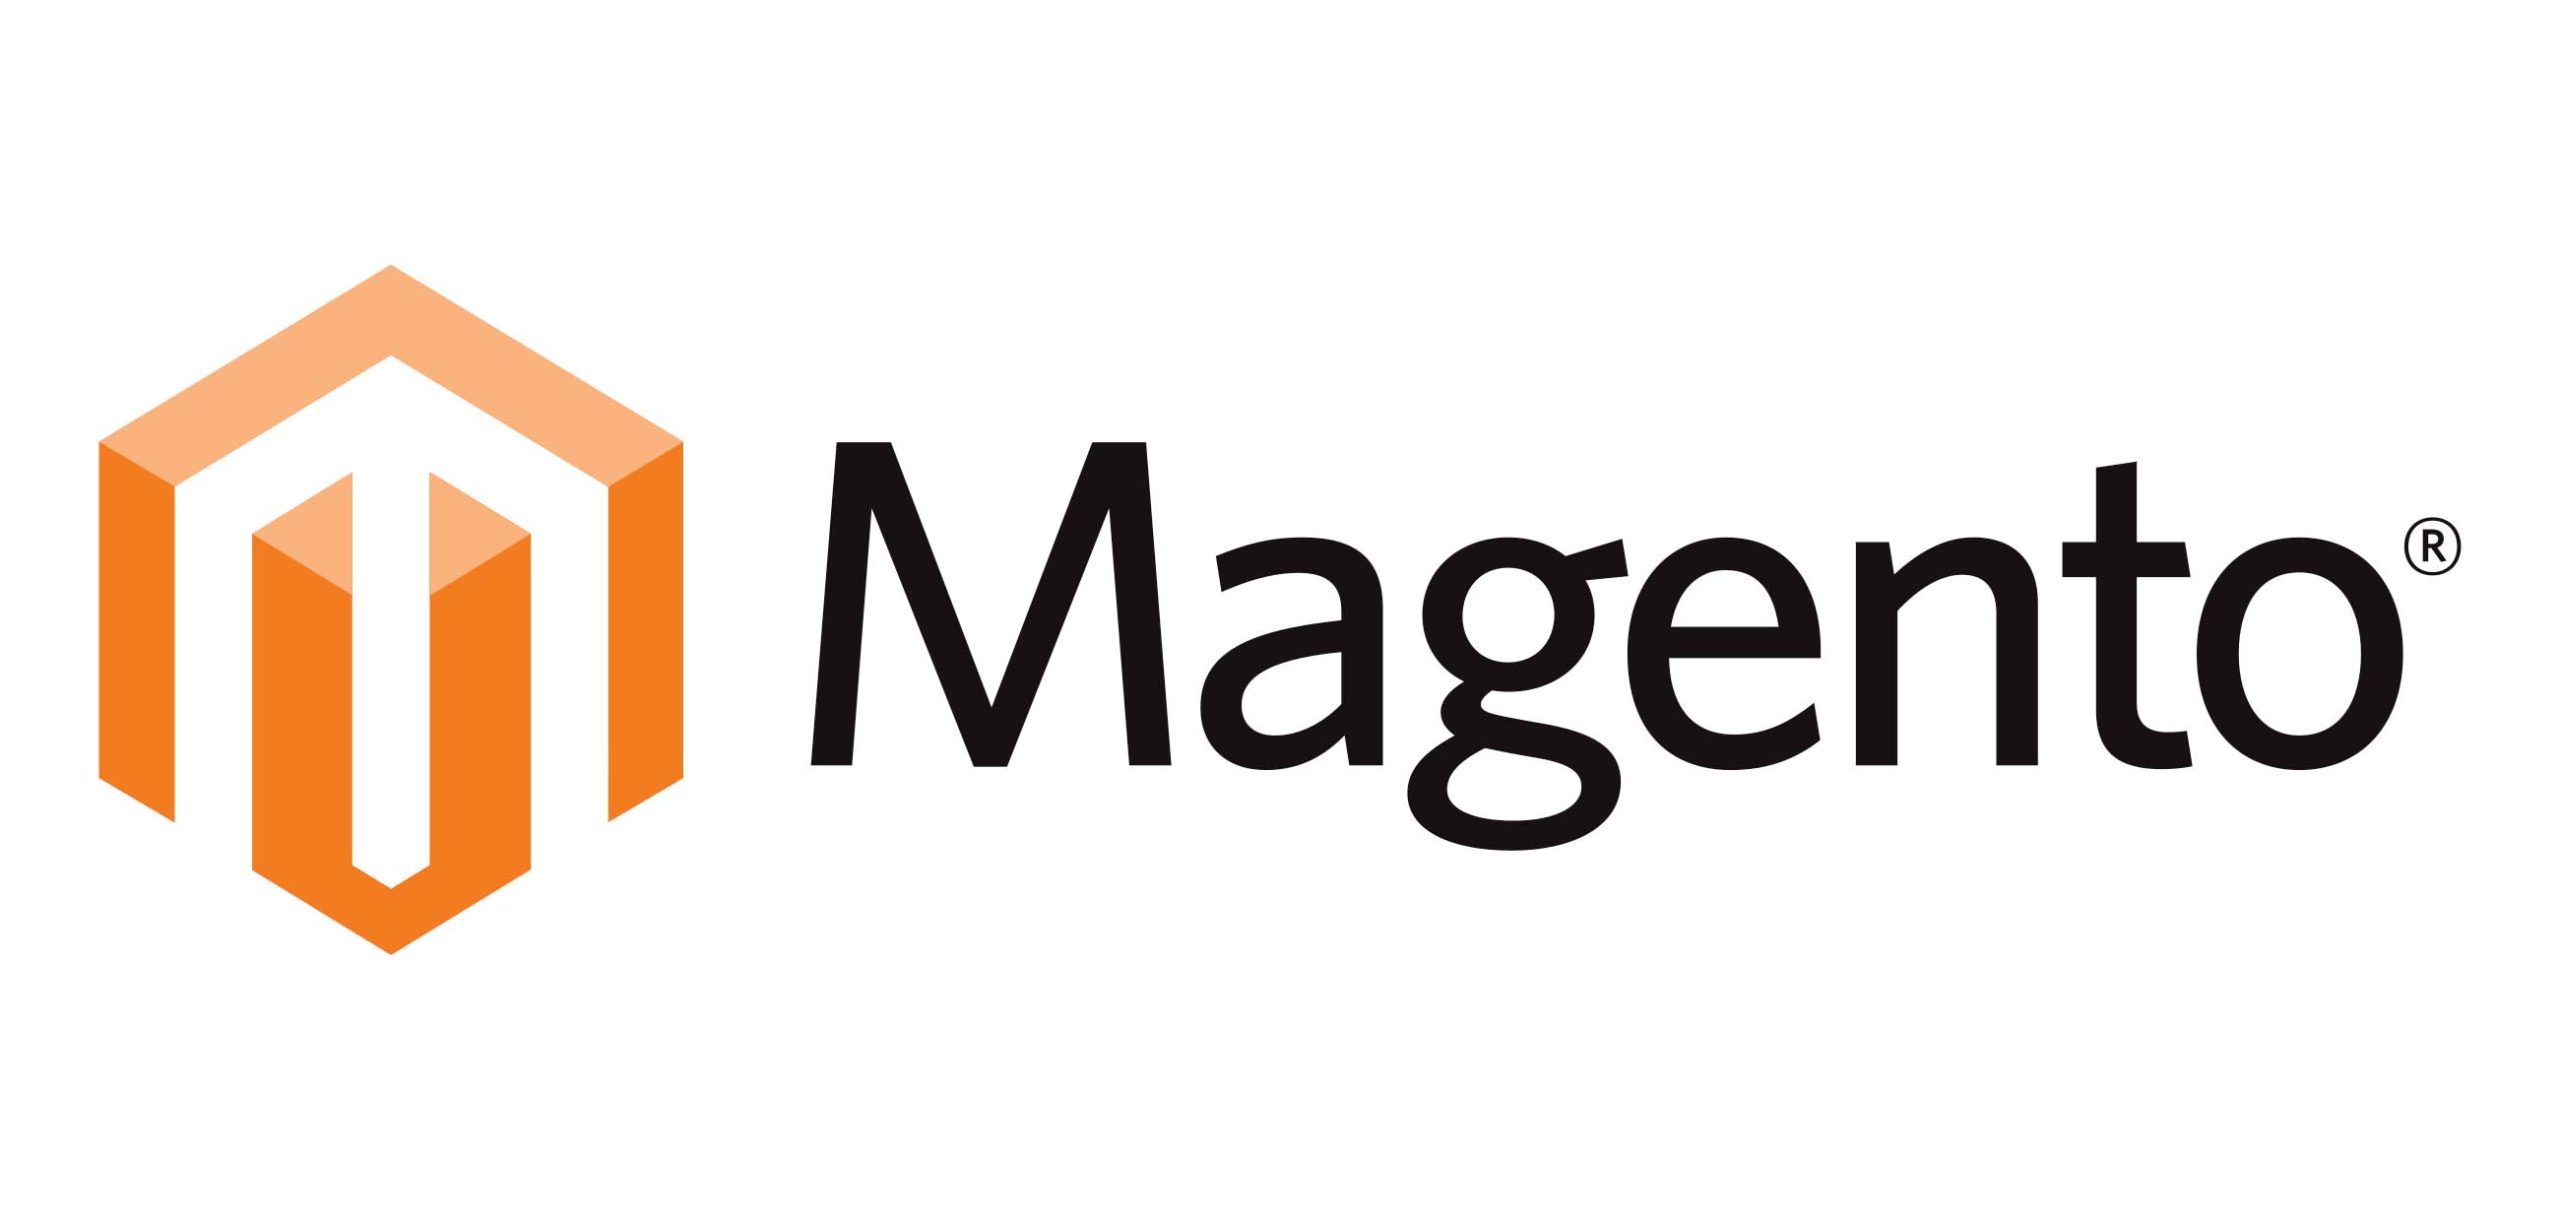 Magento overview